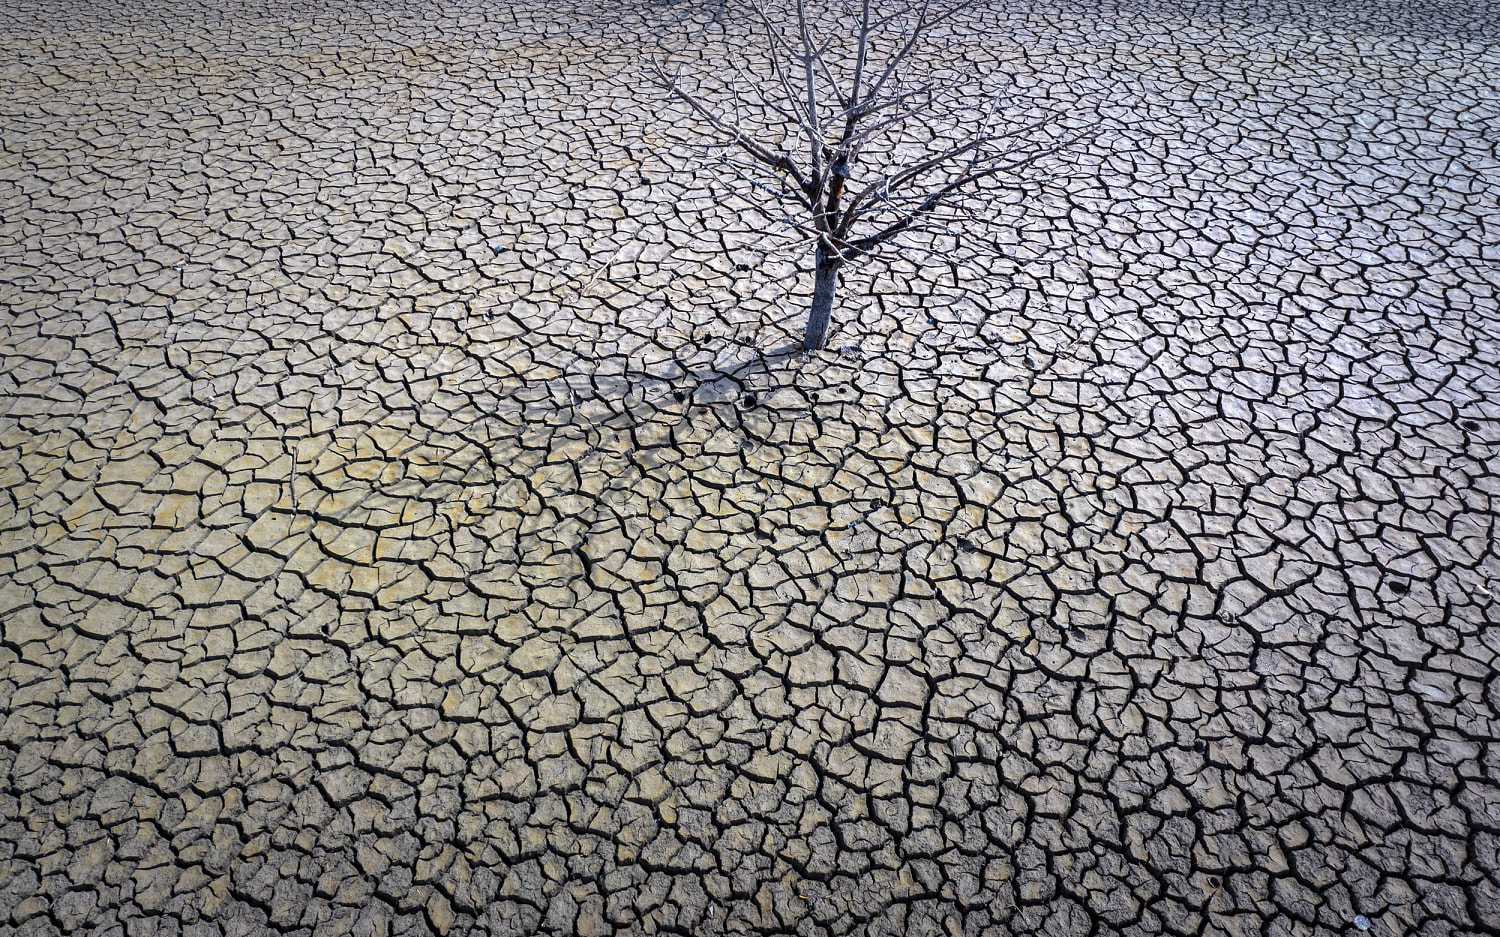 Earth just had its hottest year ever recorded — by far